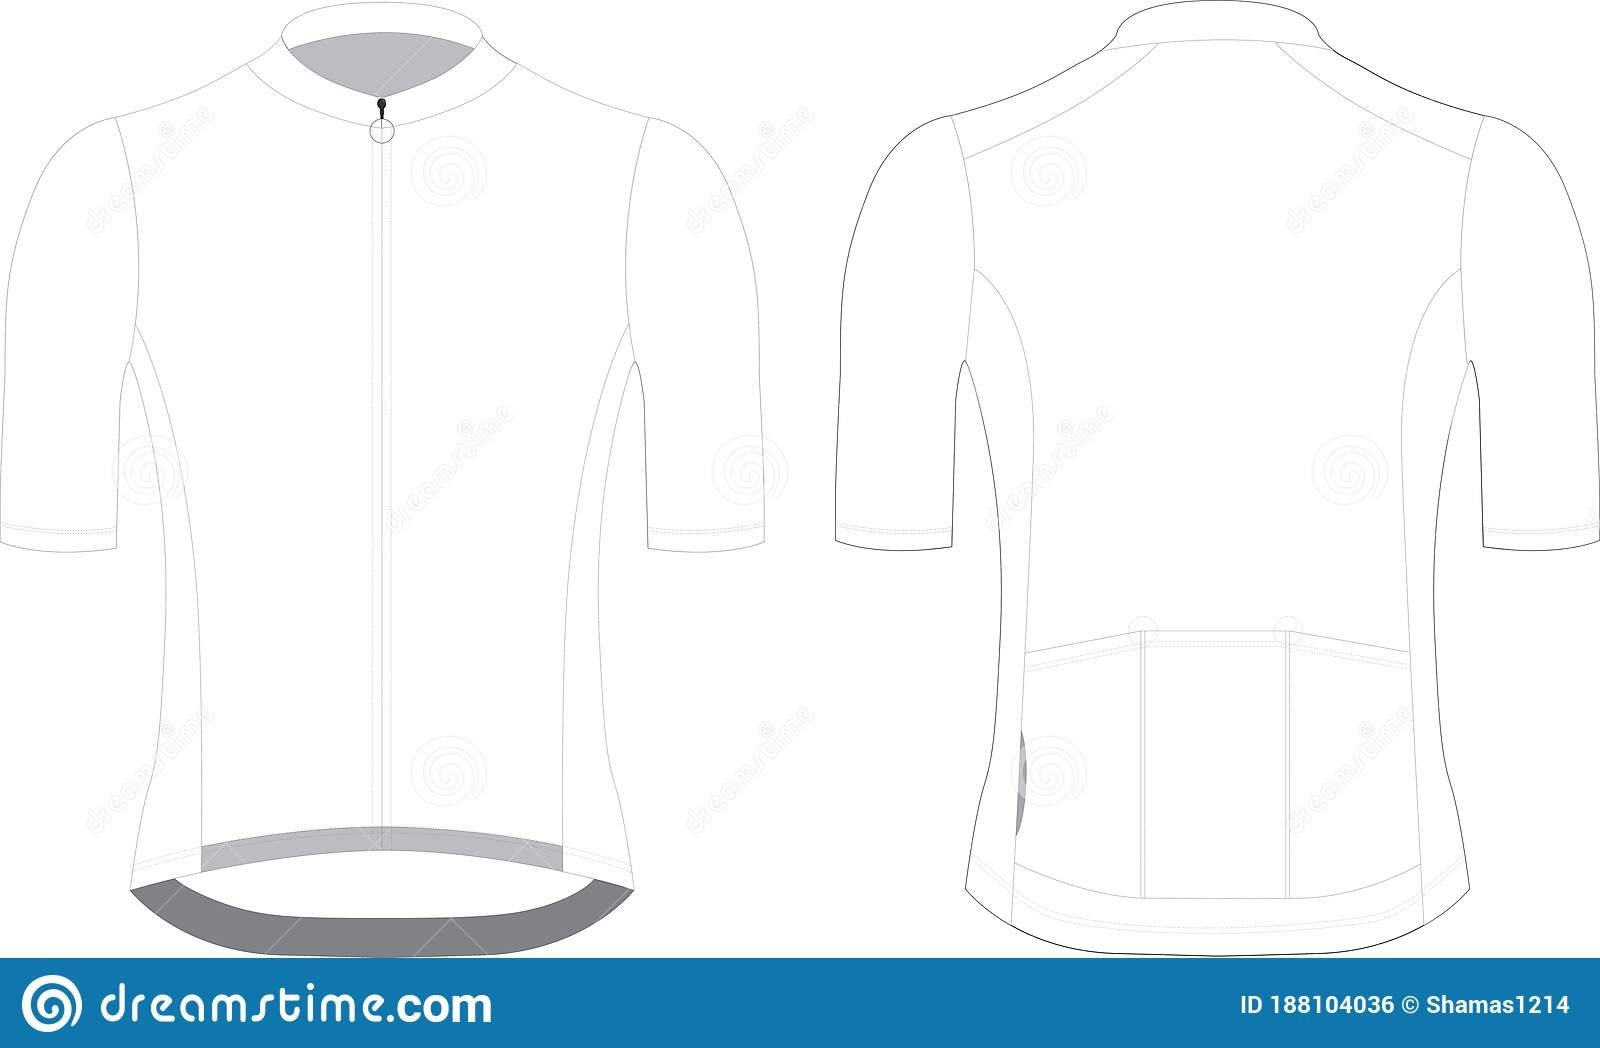 Cycling Short Sleeve Jersey Custom Design Blank Template Illustration In Blank Cycling Jersey Template